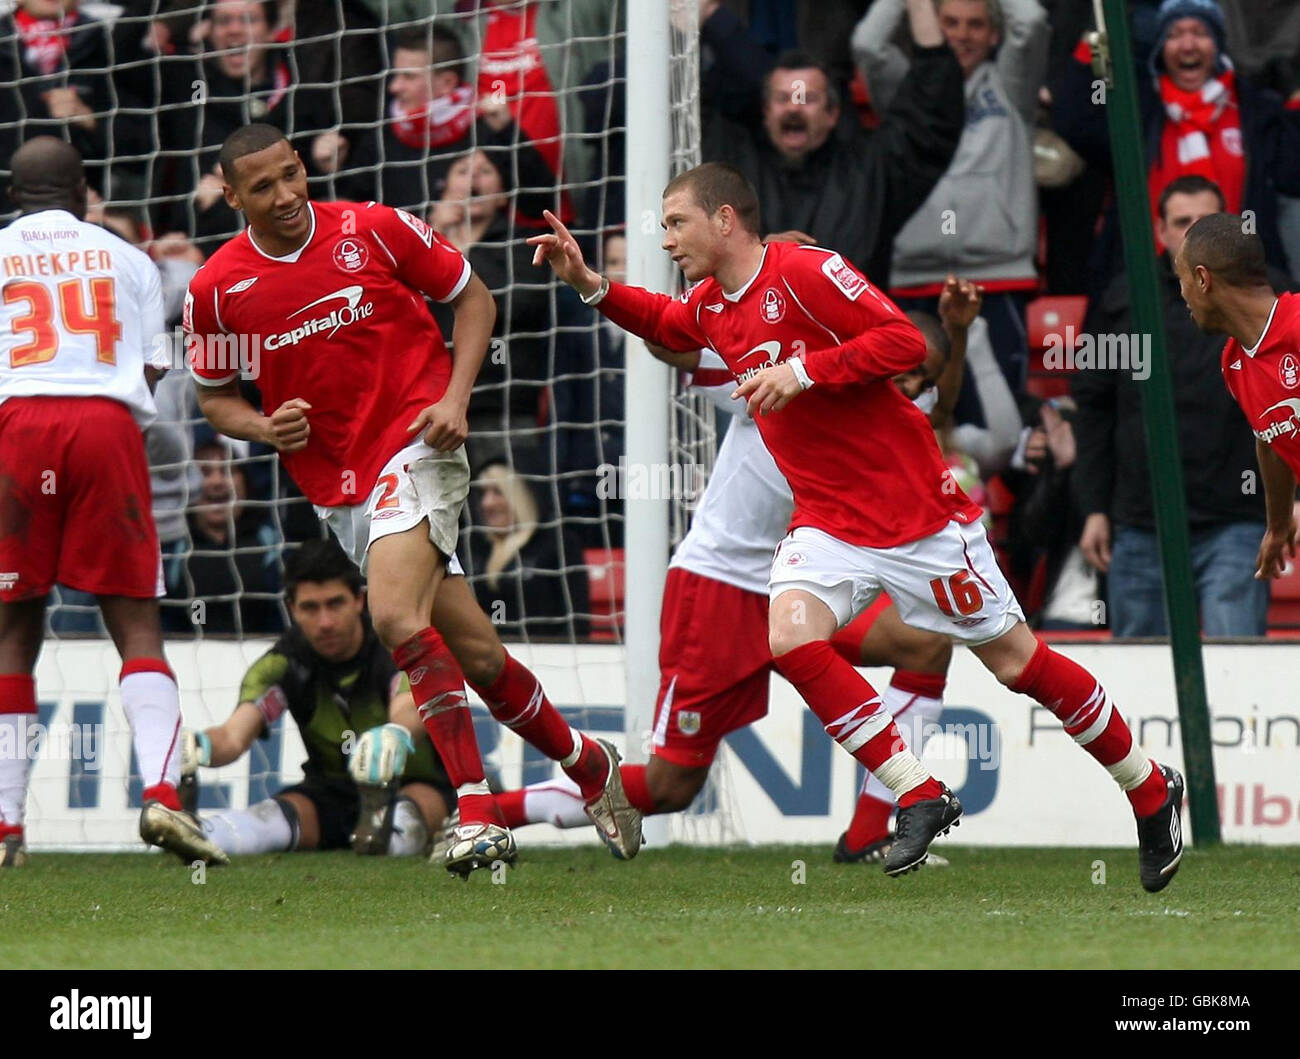 Nottingham Forest's Joe Garner celebrates scoring their second goal of the game during the Coca-Cola Football League Championship match at the City Ground, Nottingham. Stock Photo